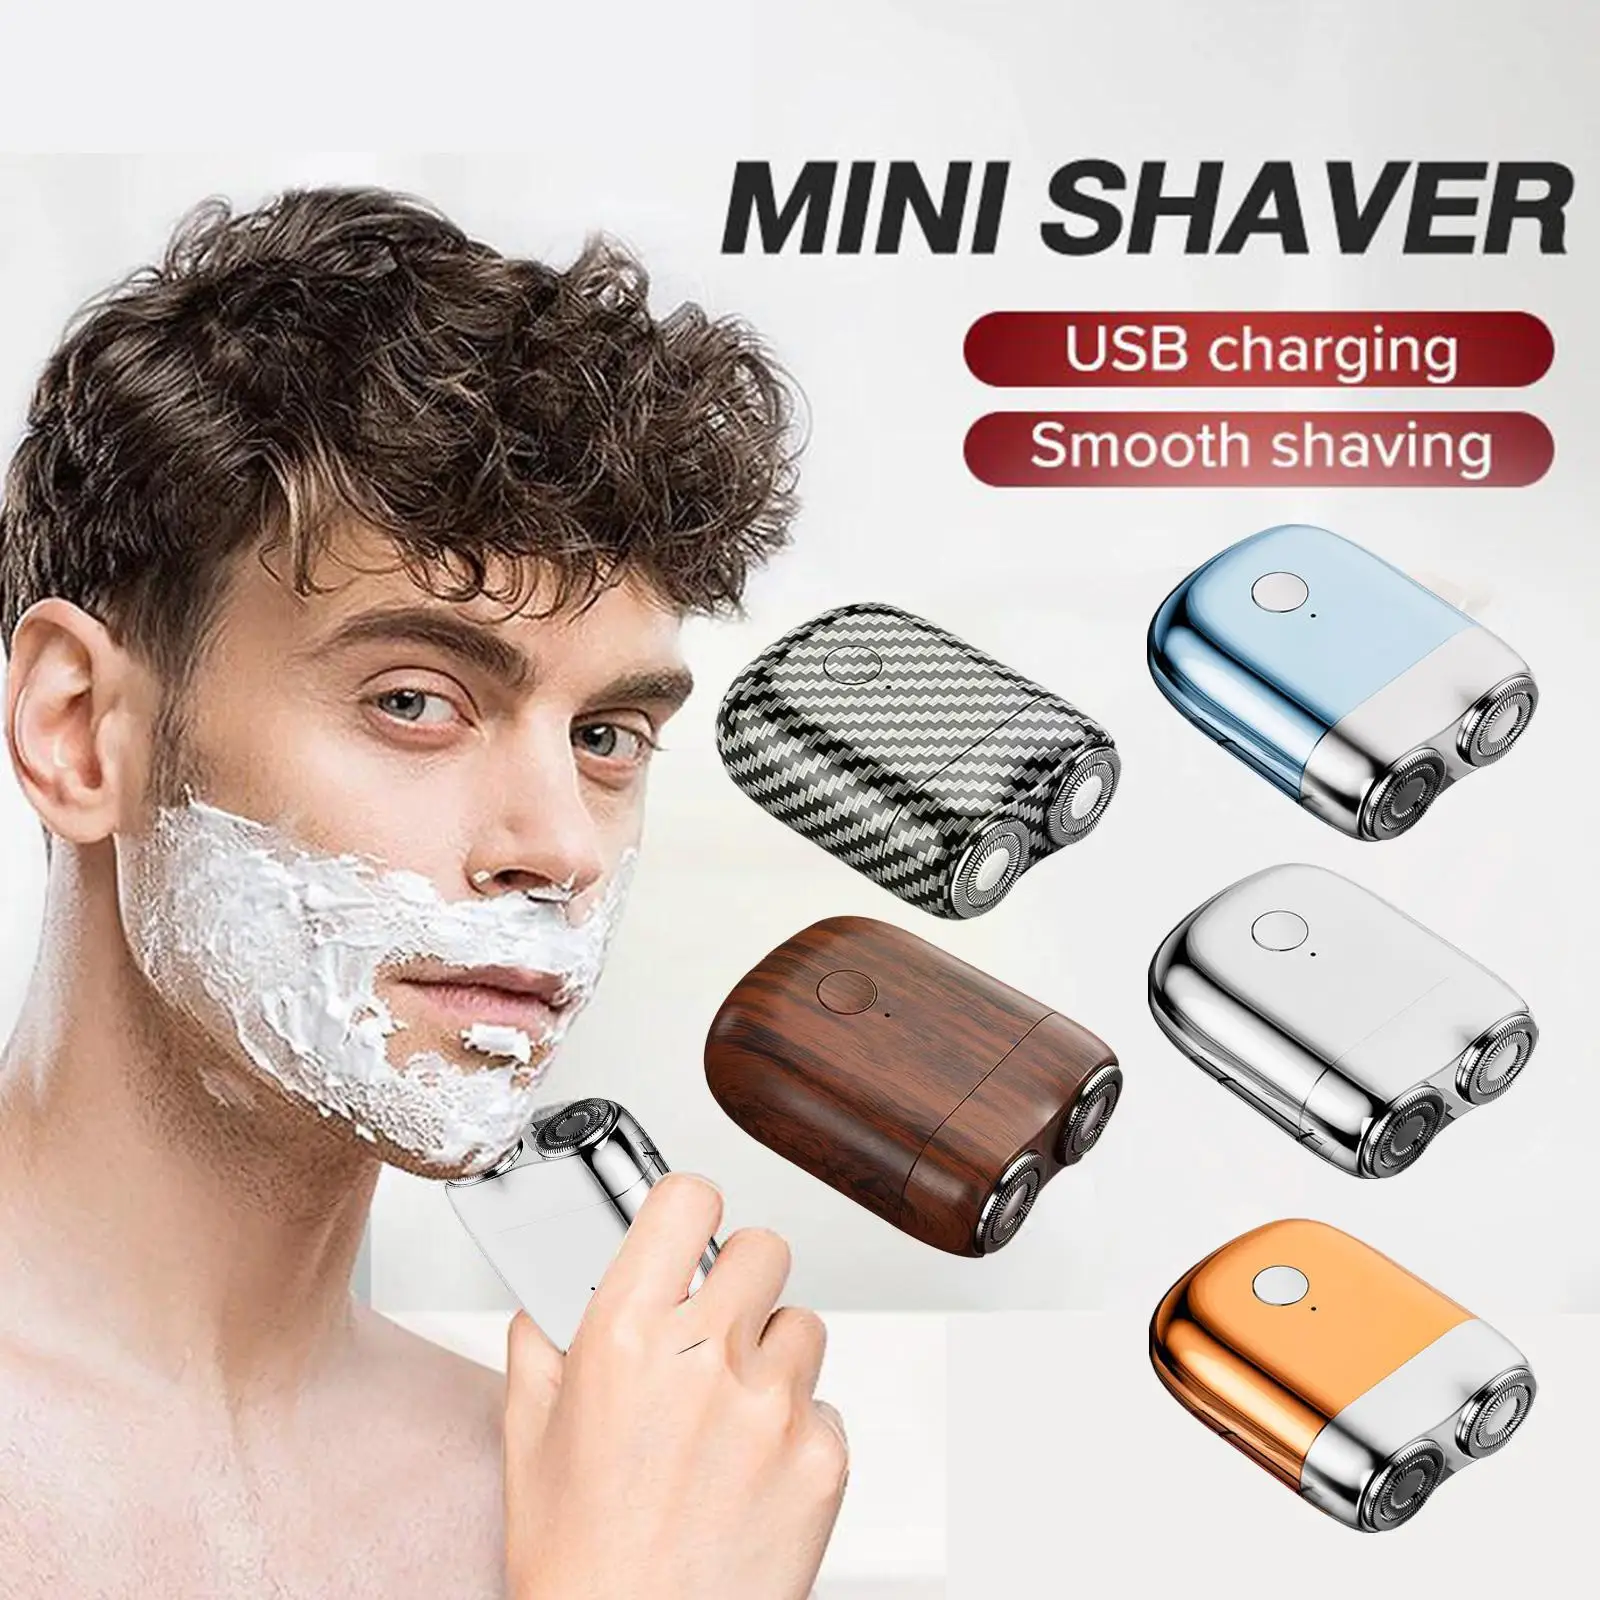 USB Rechargeable Electric Shaver Mini Portable Face Cordless Shavers Wet & Dry Painless Small Size Machine Shaving For Men I6W6